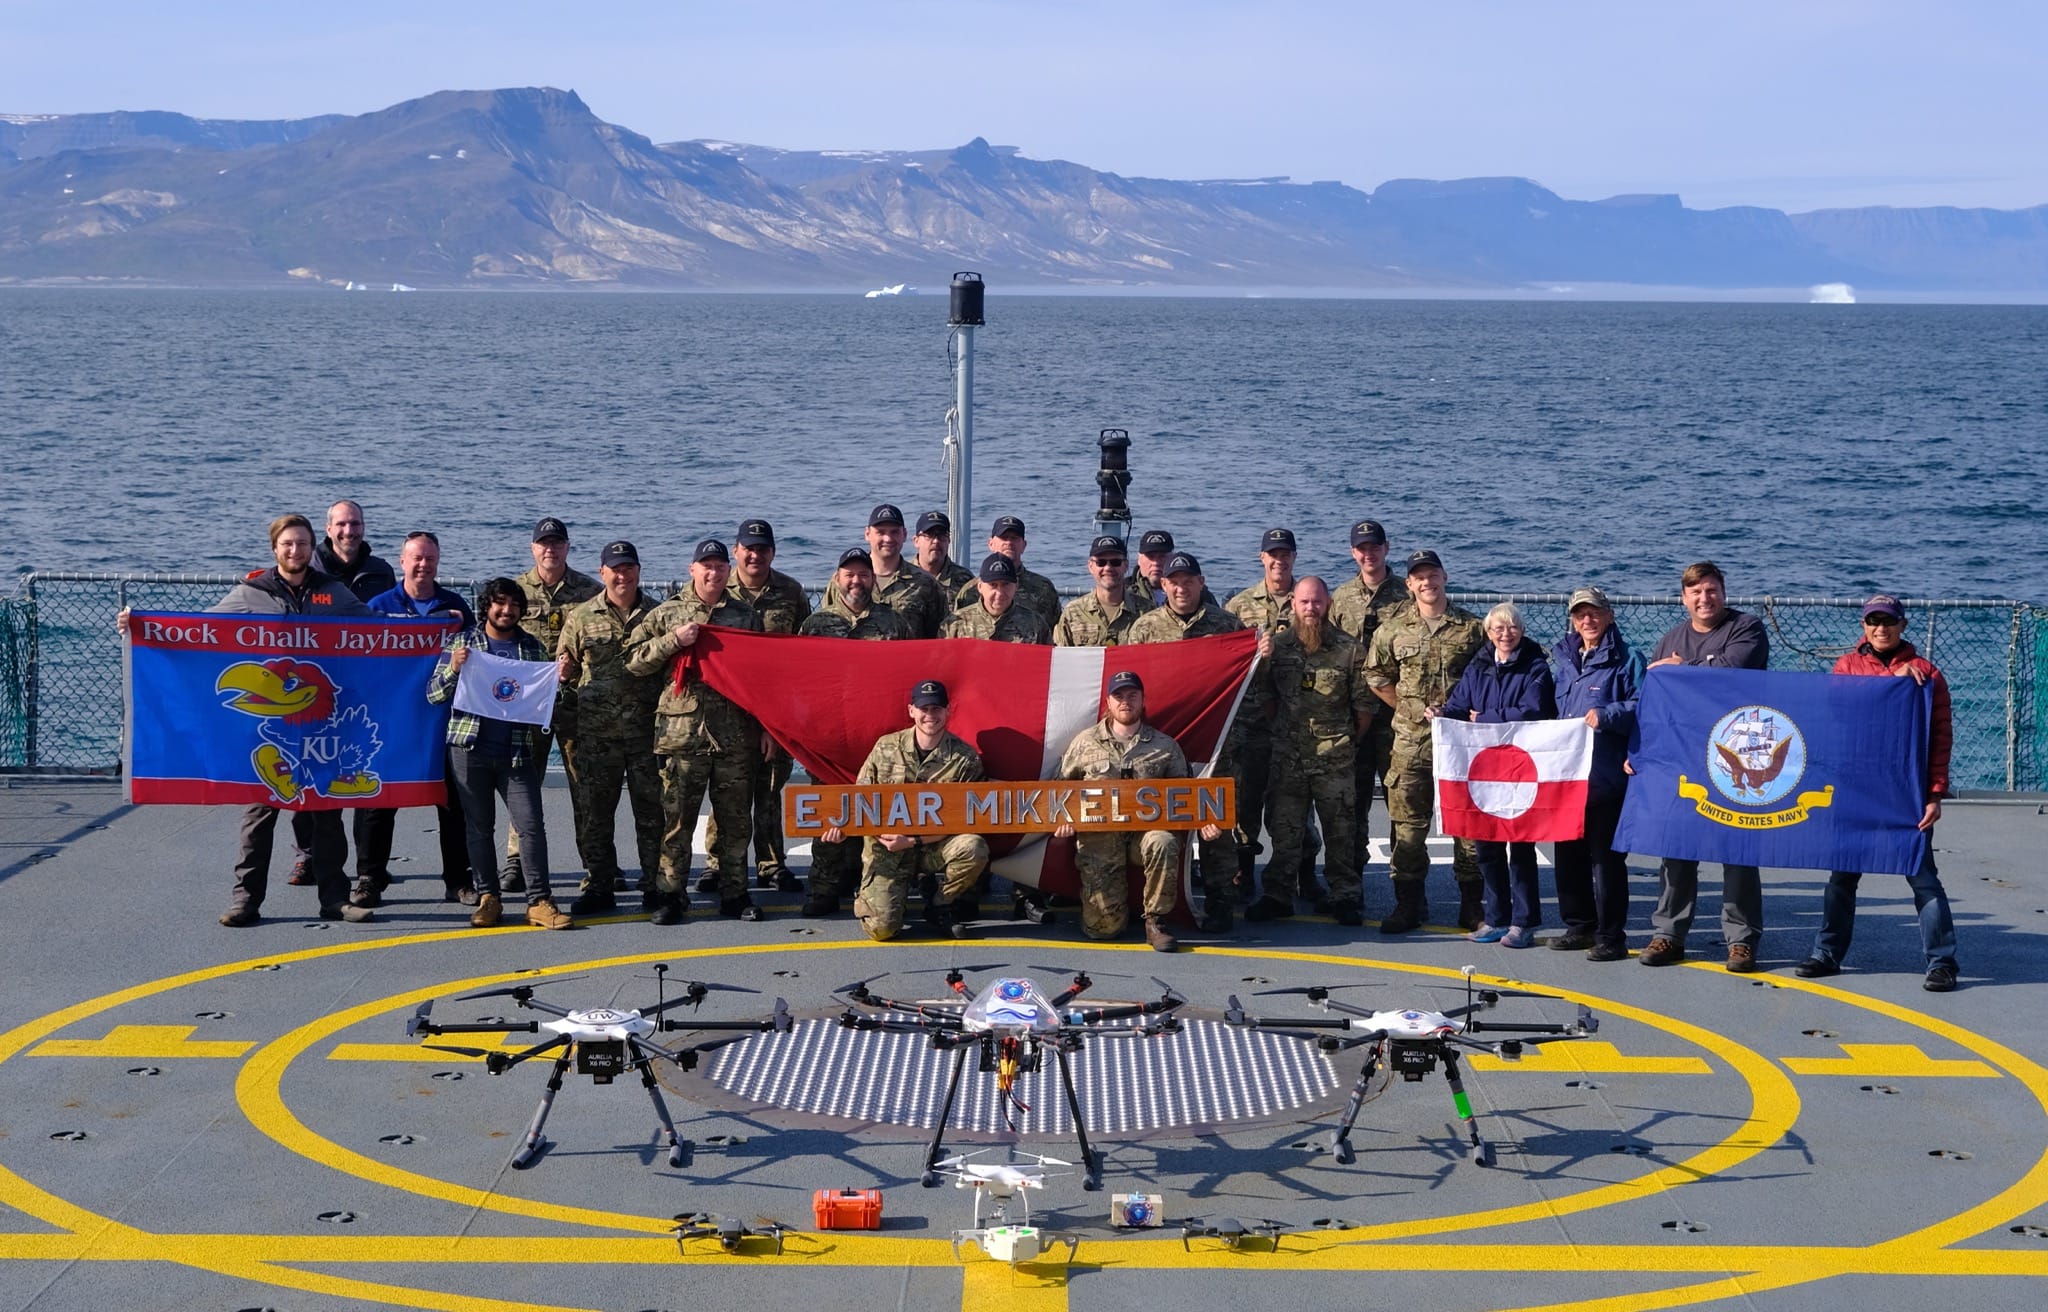 Three research teams stand aboard the Danish Navy vessel in Disko Bay